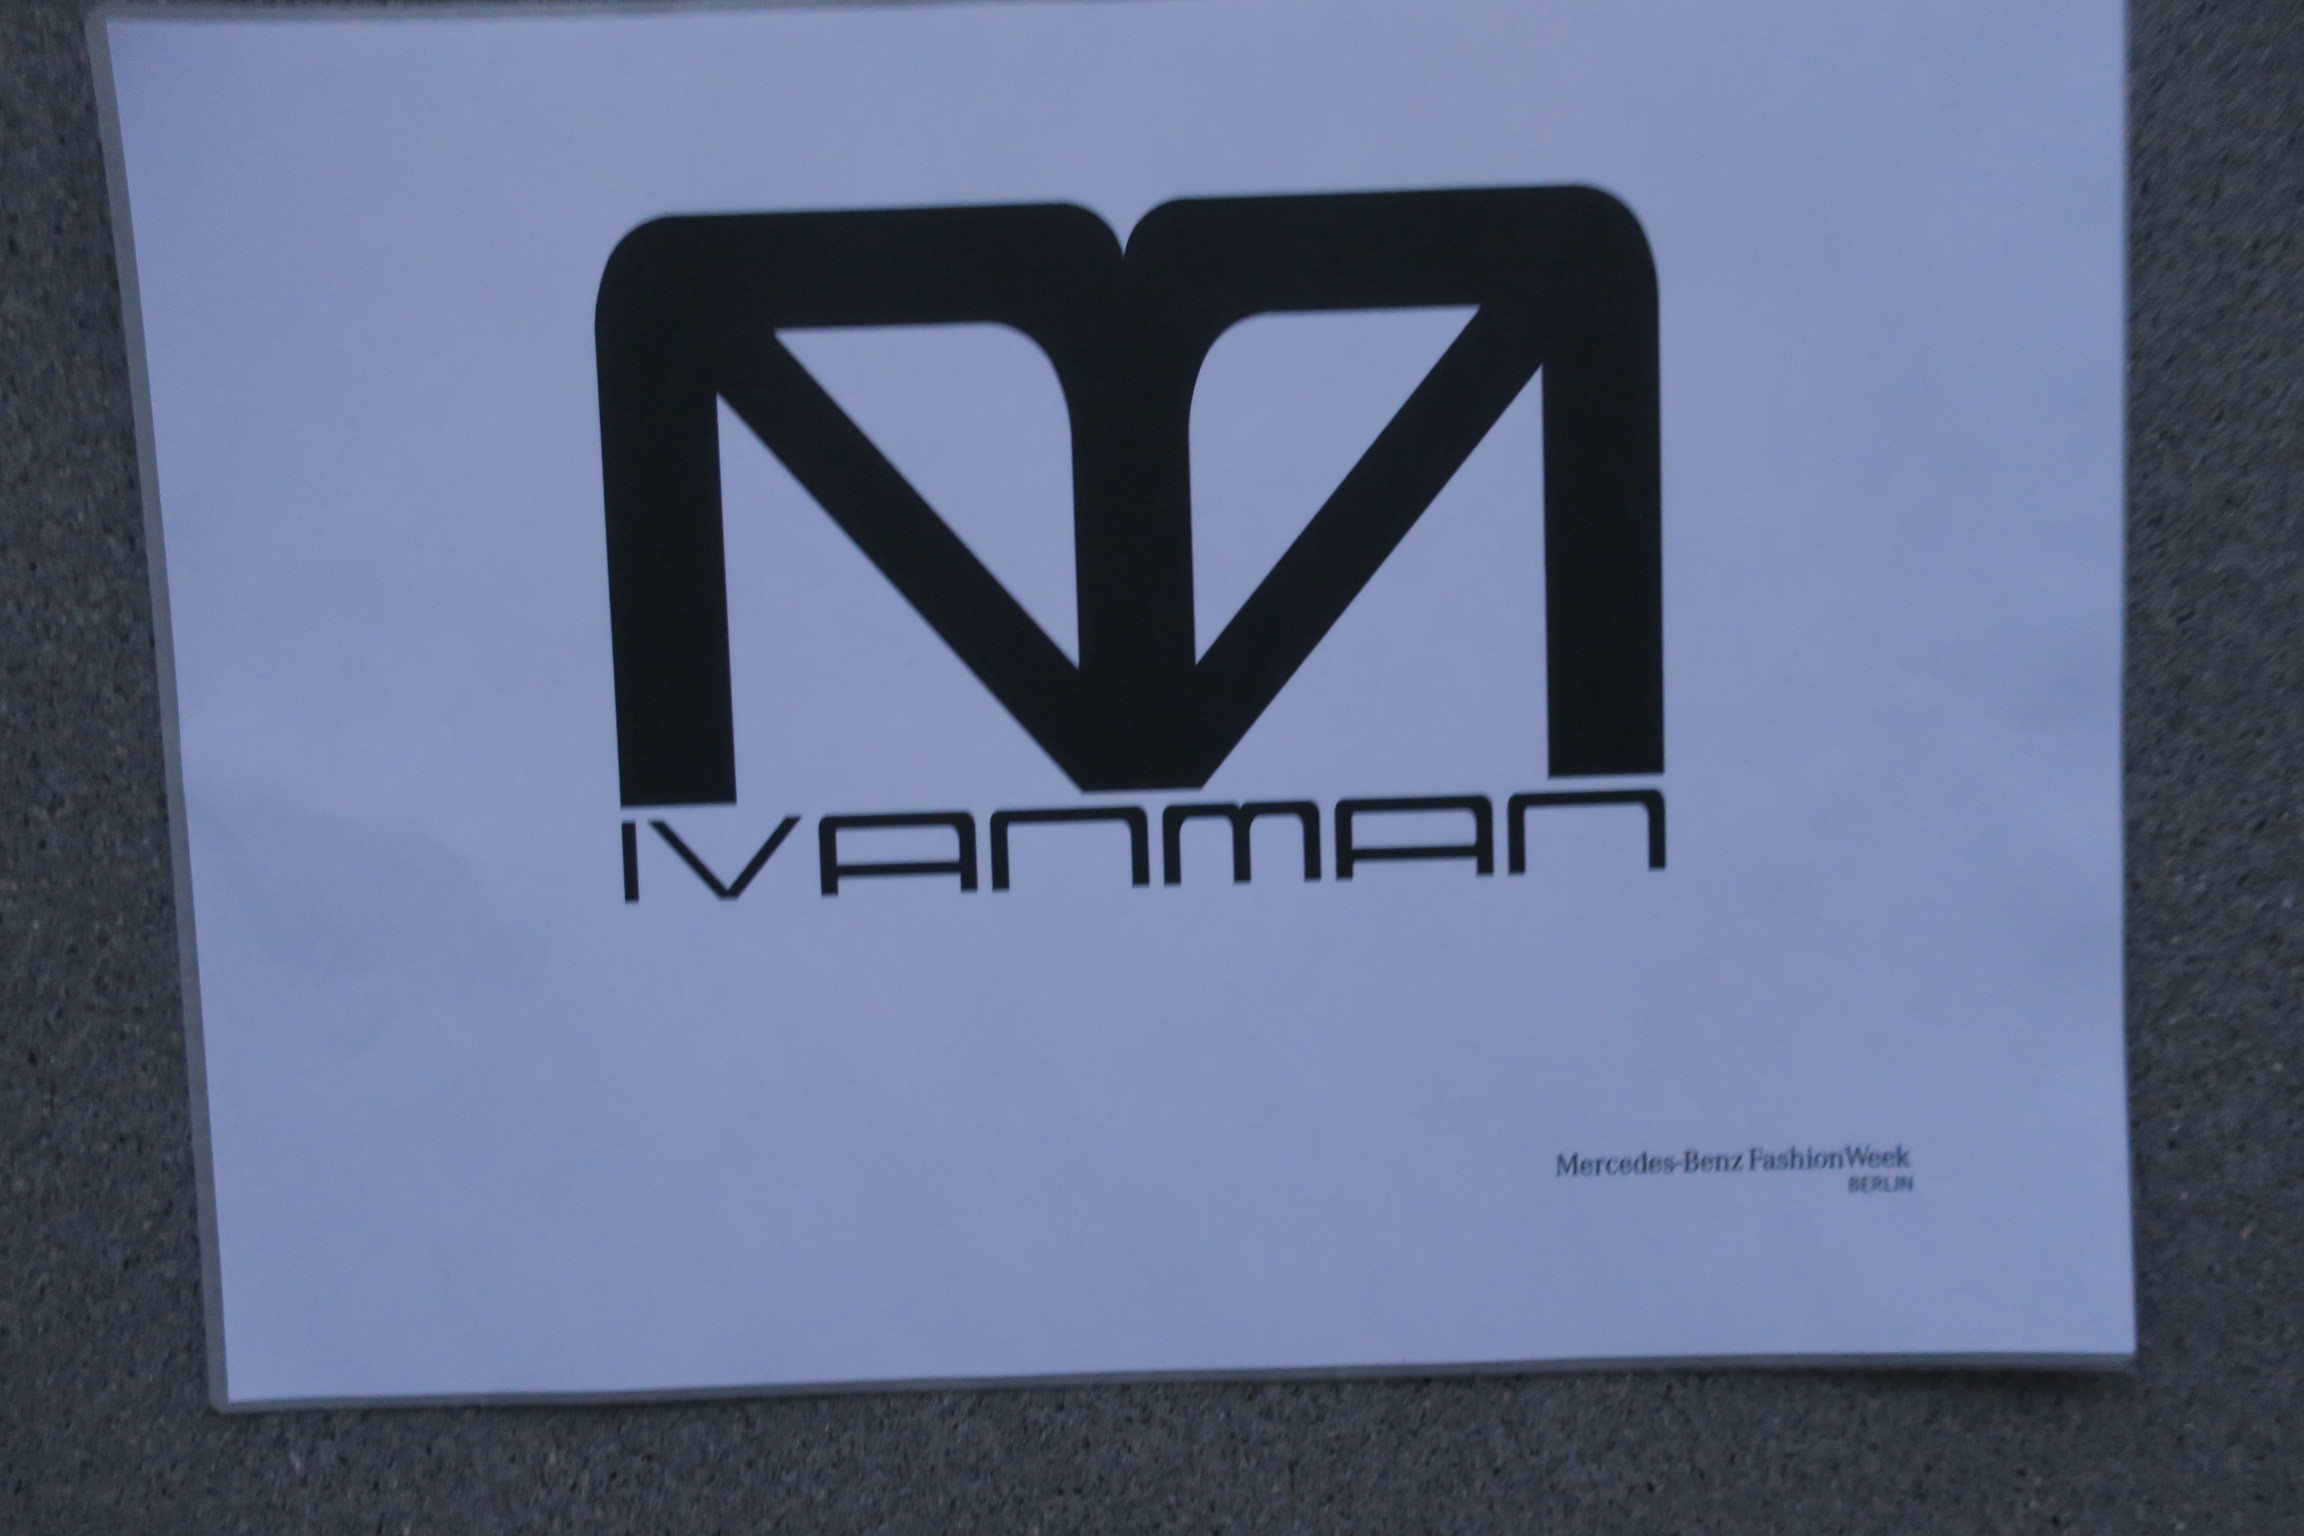 Behind the scenes with Ivanman at MBFWB